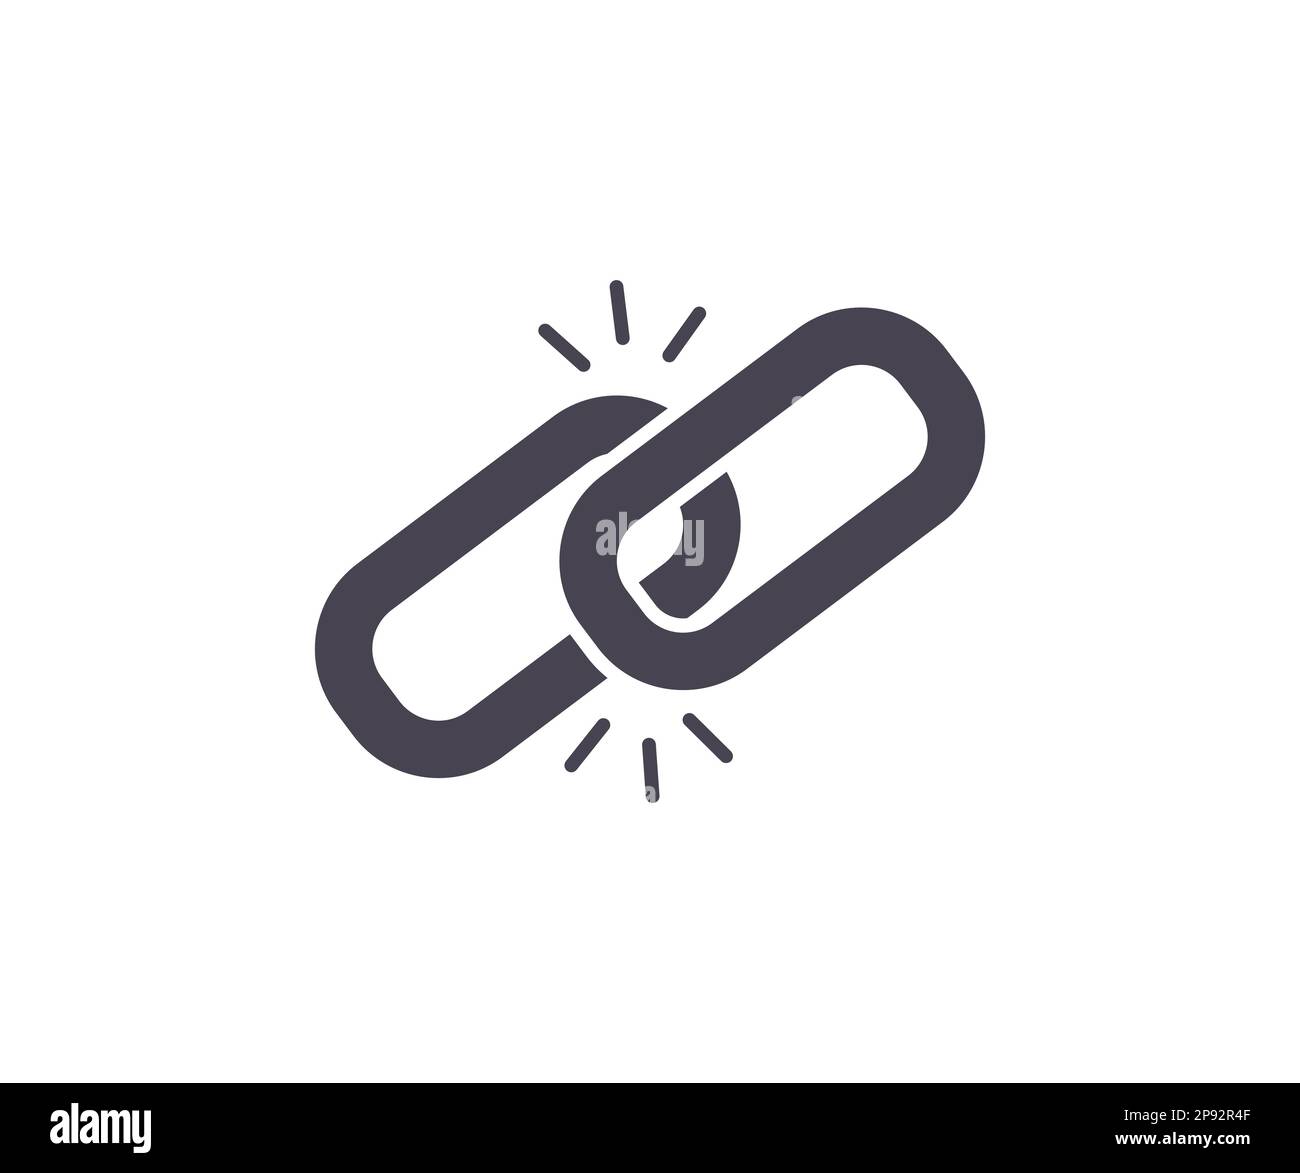 Chain thick line icon, outline vector sign logo design. Seamless shape, for graphic design of emblem, symbol, sign, badge, label, stamp, isolated. Stock Vector